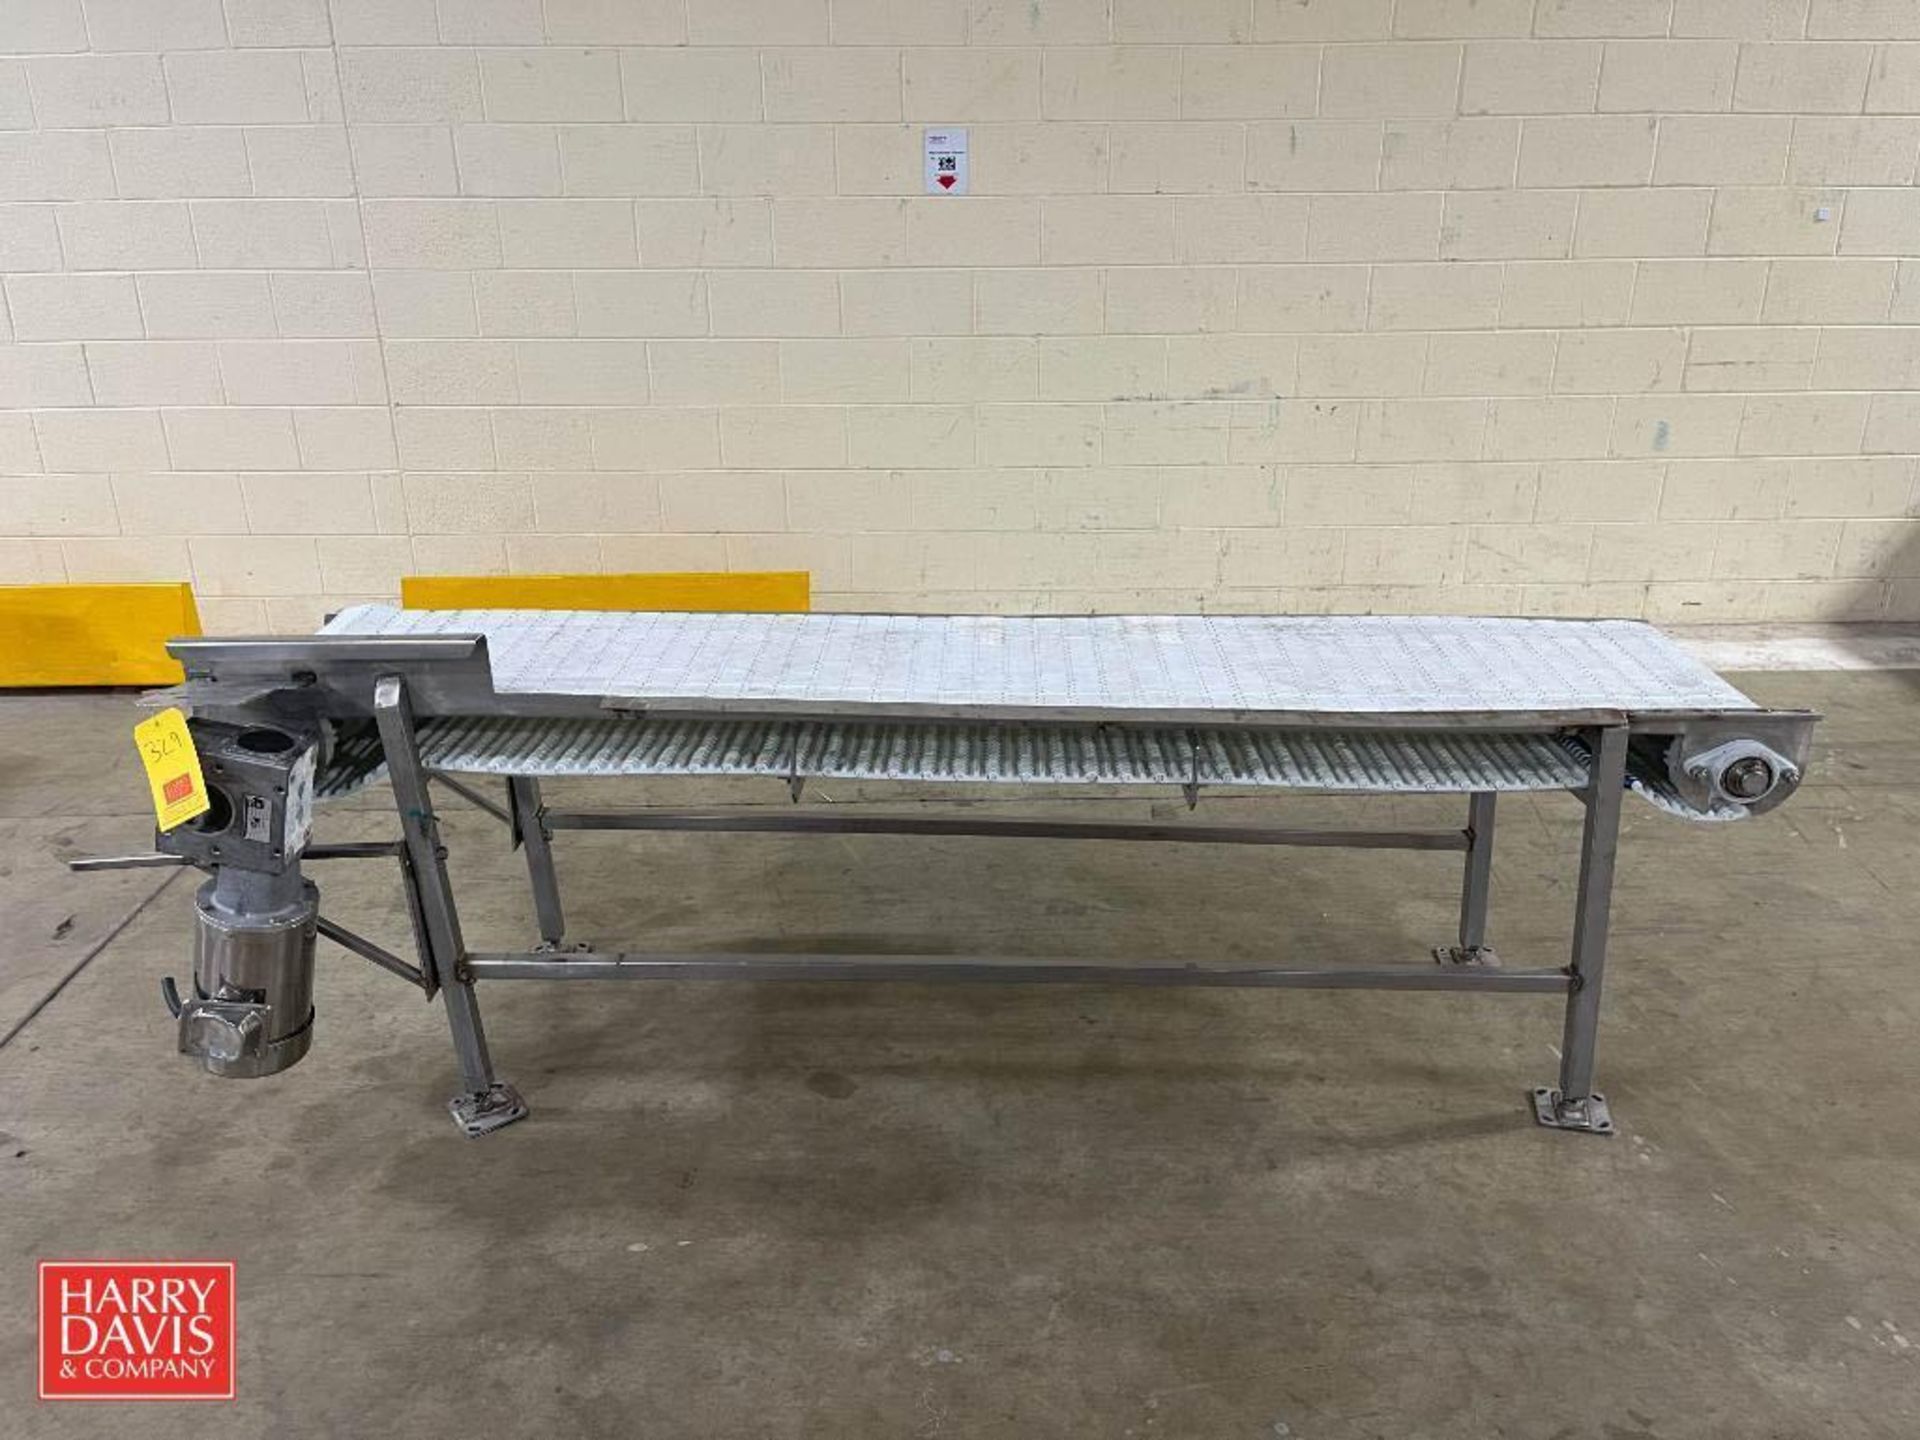 S/S Frame Conveyor with Belt and S/S Drive, 8' Length x 18" Width (Location: Denver, CO) - Image 2 of 4